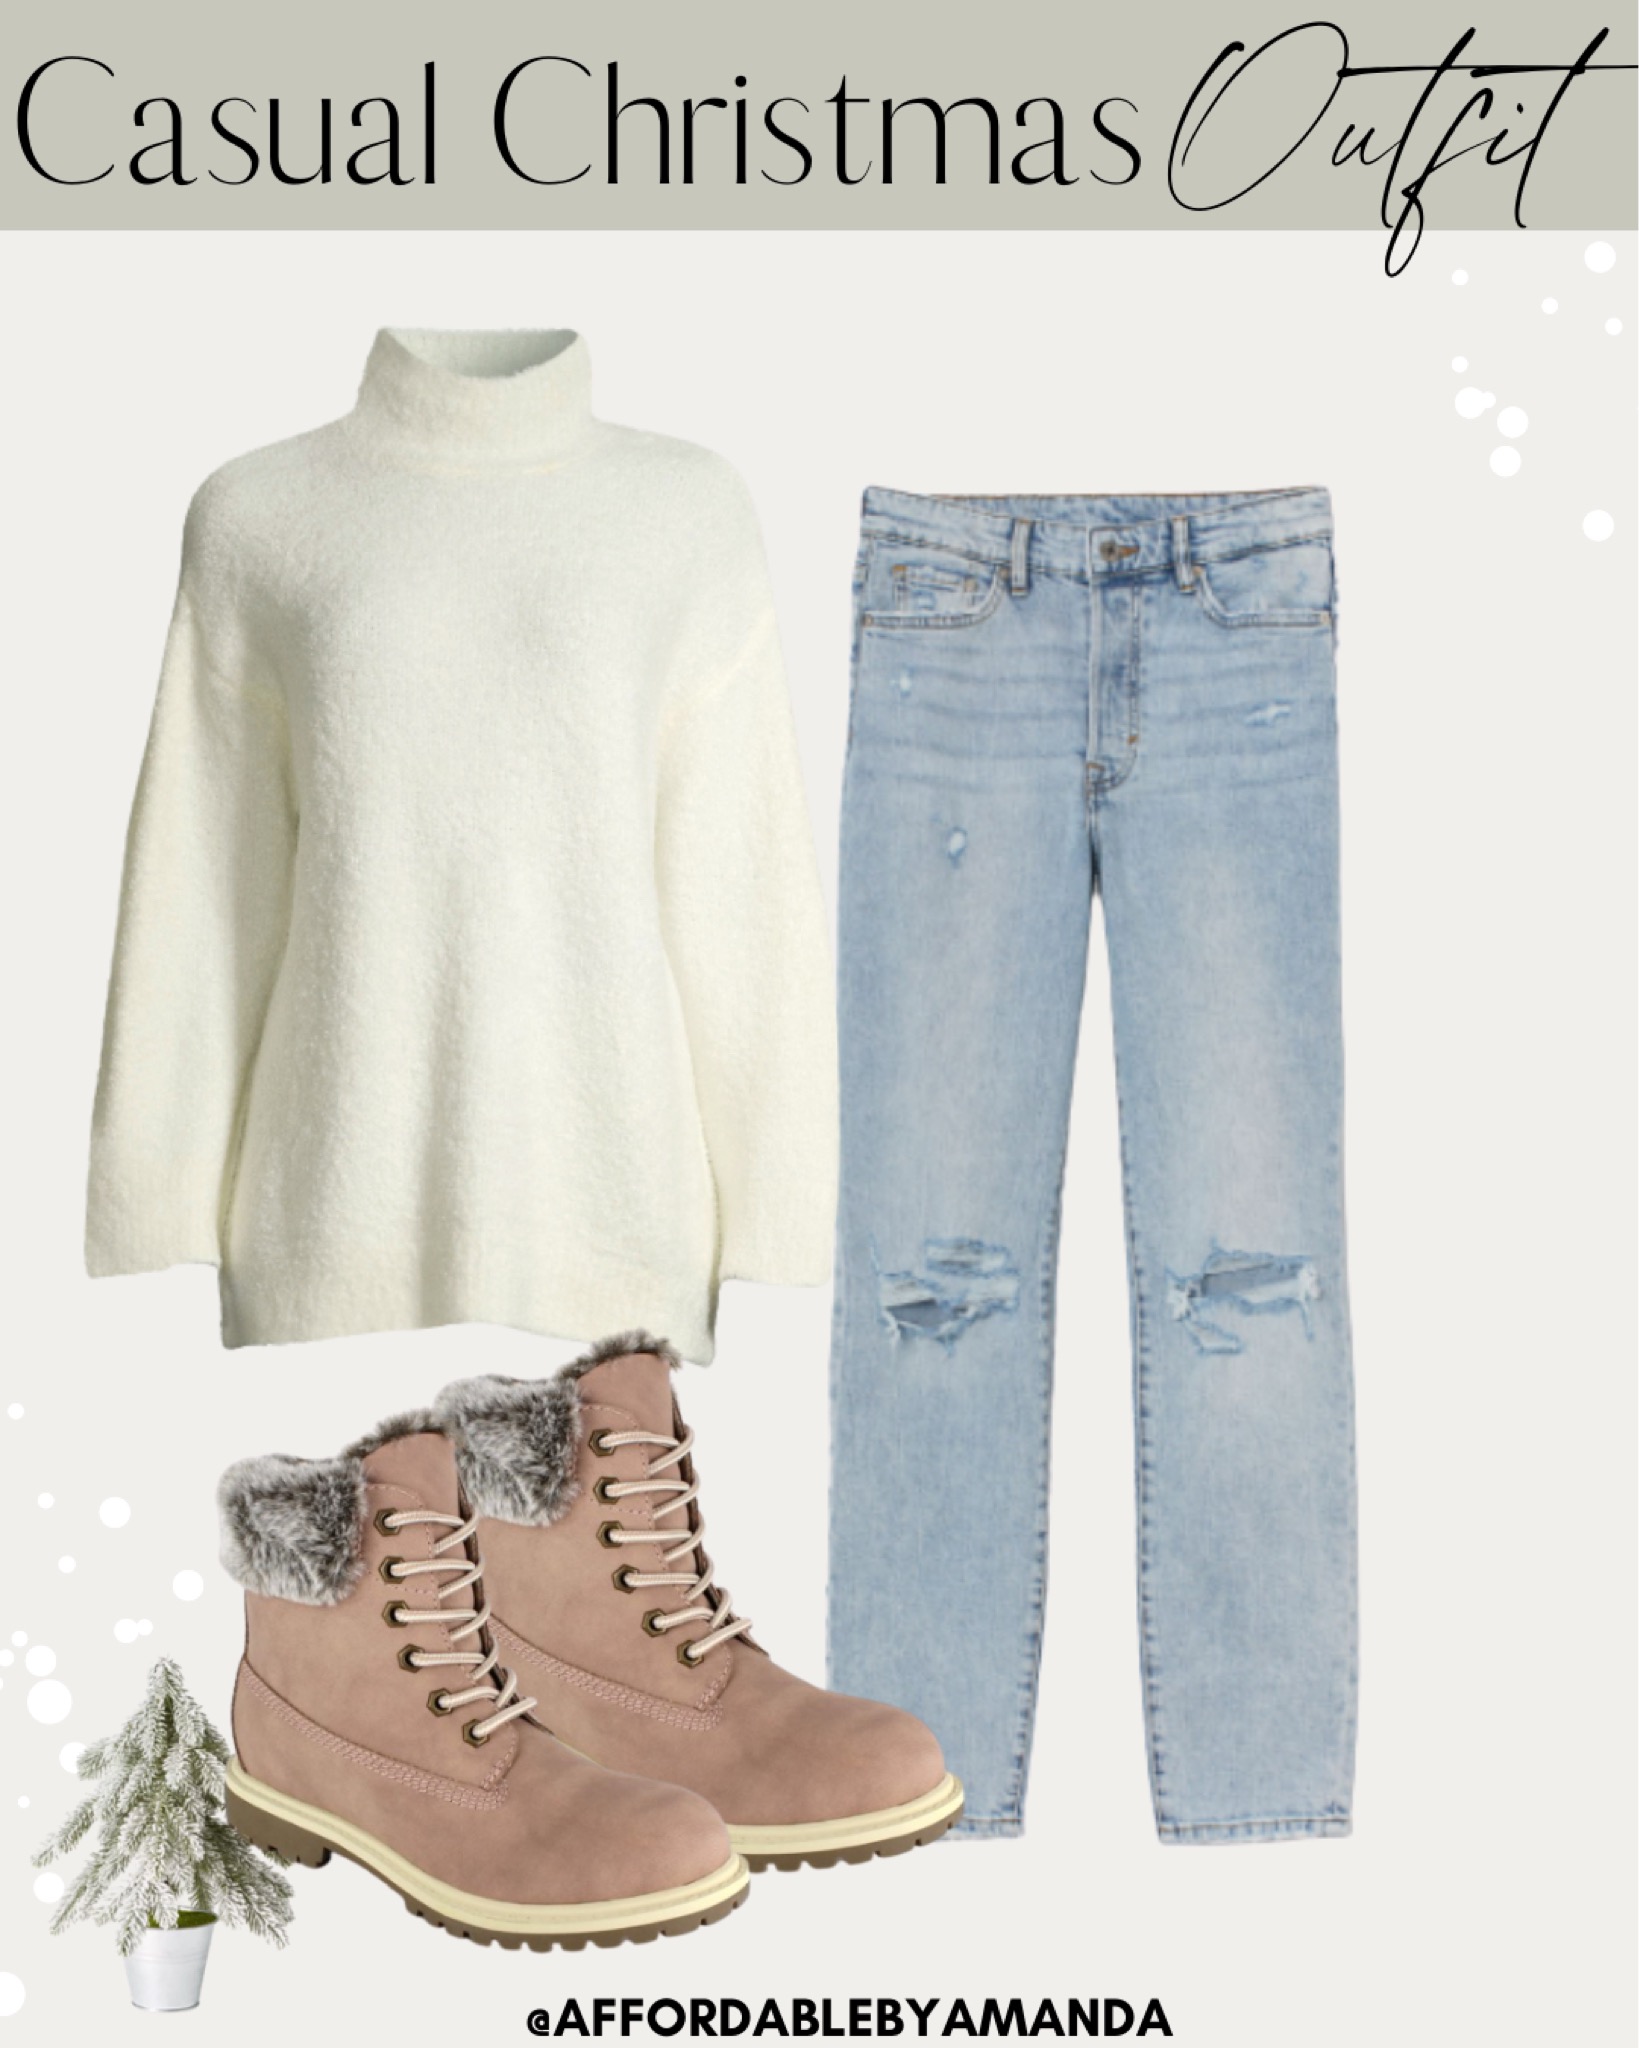 Casual Christmas Outfits | Scoop Women's Cozy Funnel Neck Tunic Sweater | Mom High Ankle Jeans | Women's Snow Boots | Affordable by Amanda